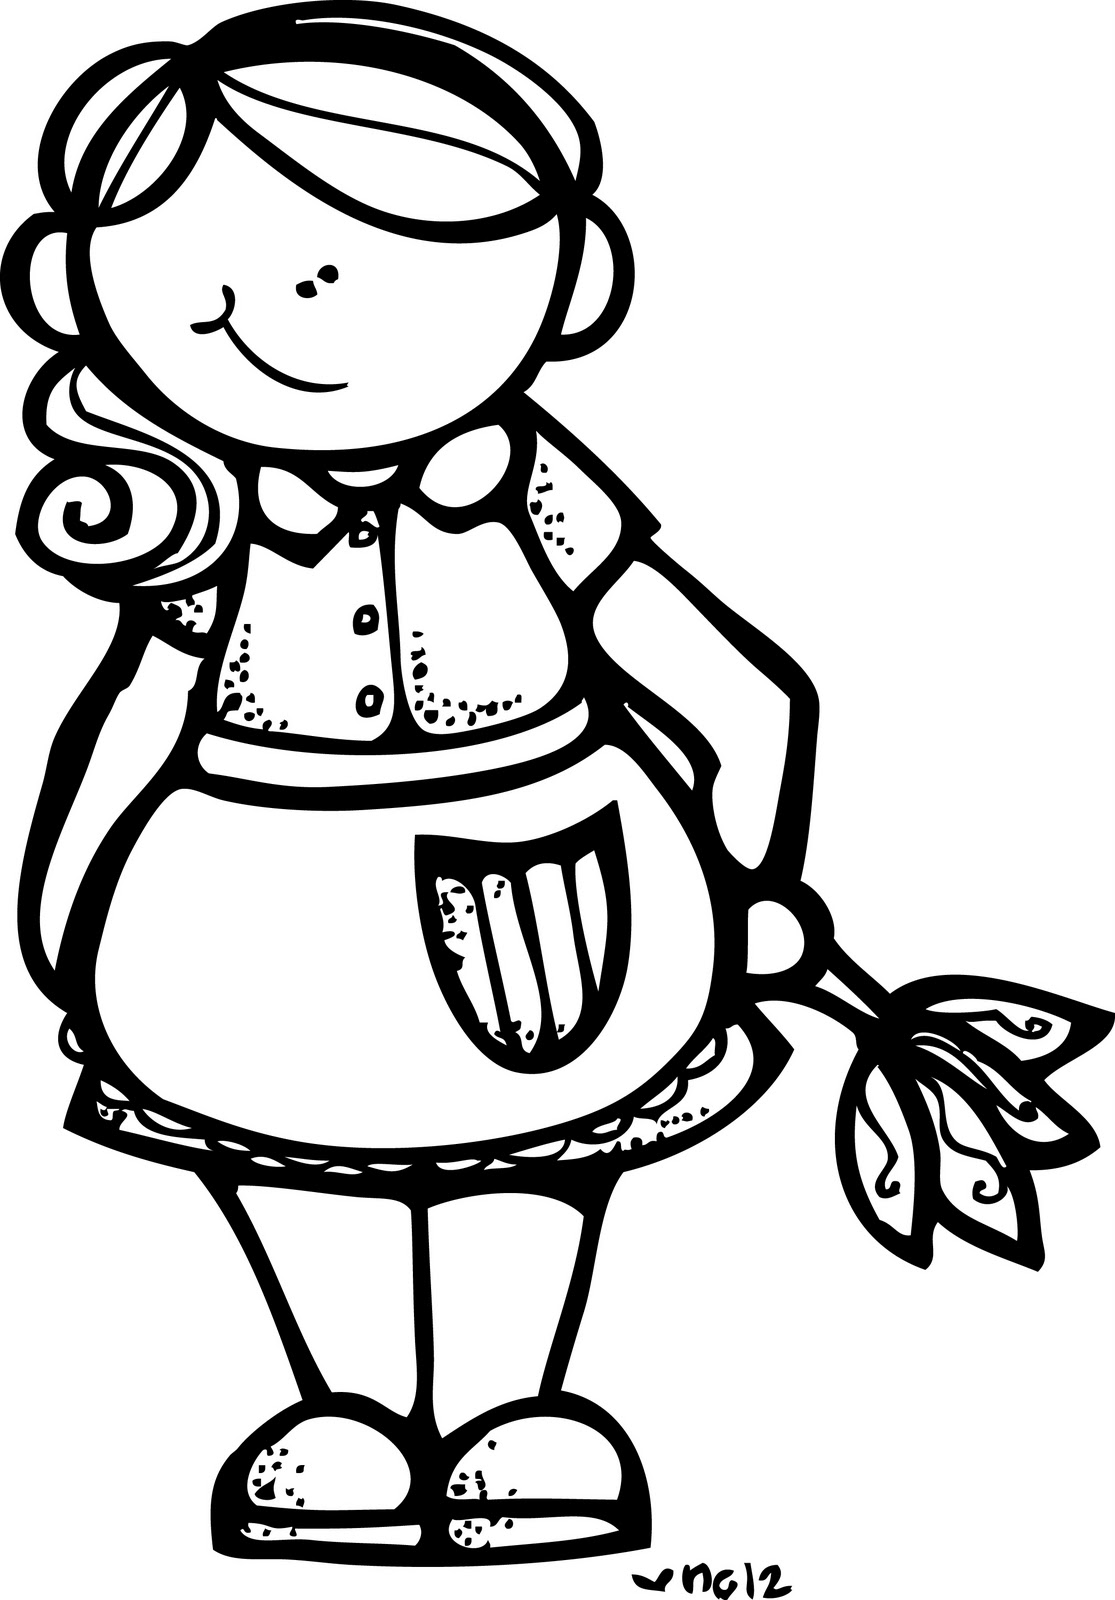 Housekeeping clipart black and white 